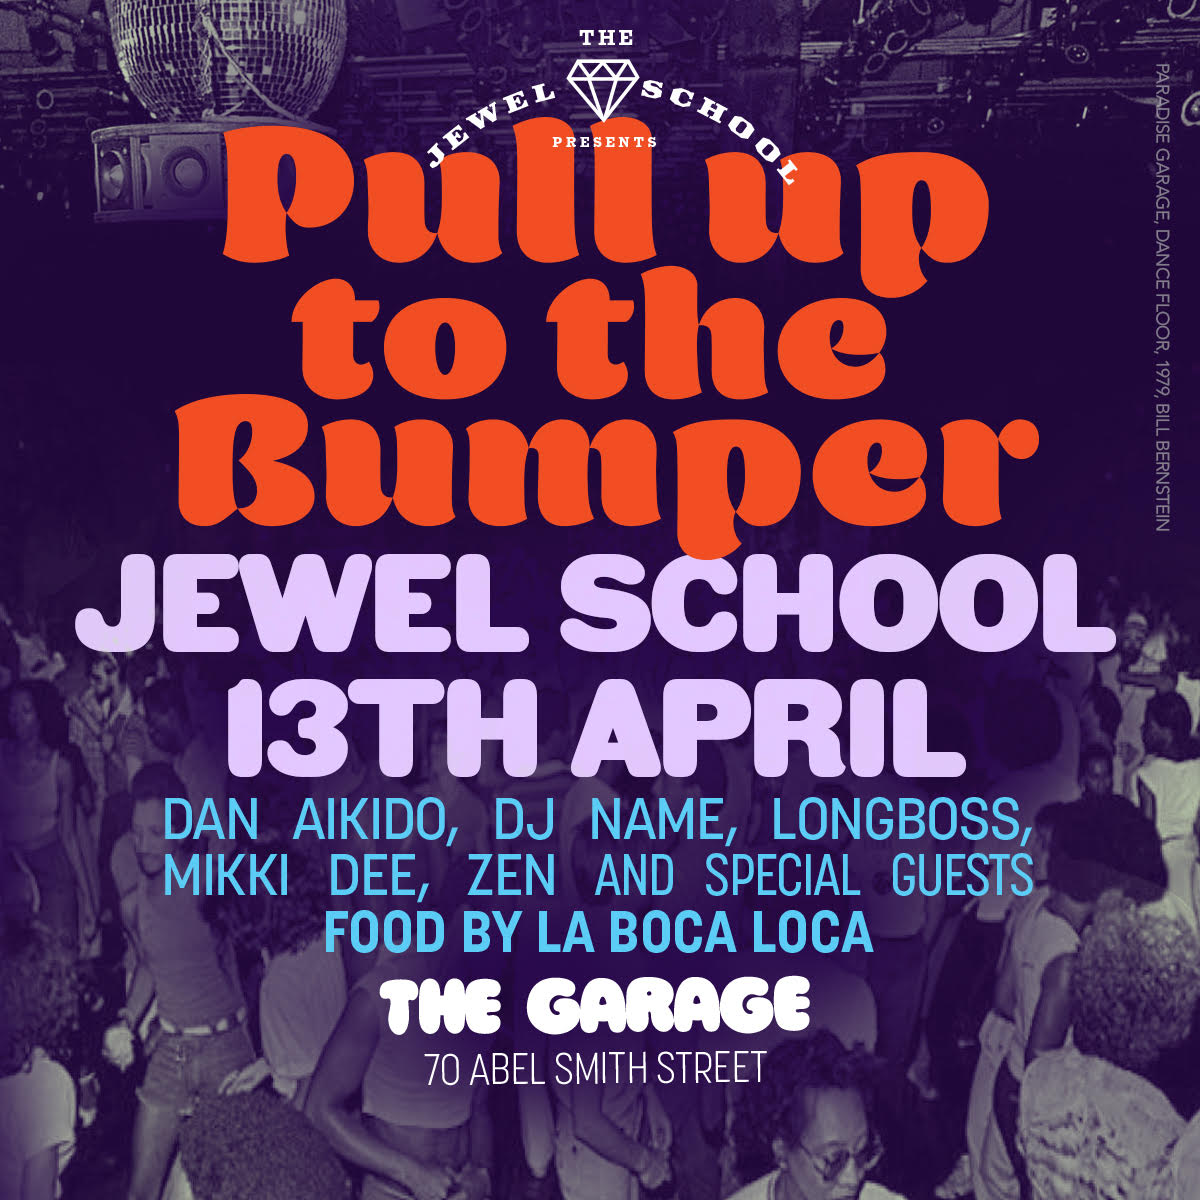 Kia ora Pōneke, Pull Up To The Bumper at The Garage pop-up party this Sat night. Special Guest Selector at The Jewel School shindig is the one and only Chopper Reeds aka Scott Towers alongside Jewel School titans. Boogie down. Tix UTR tinyurl.com/mszjn574 + Door Sales